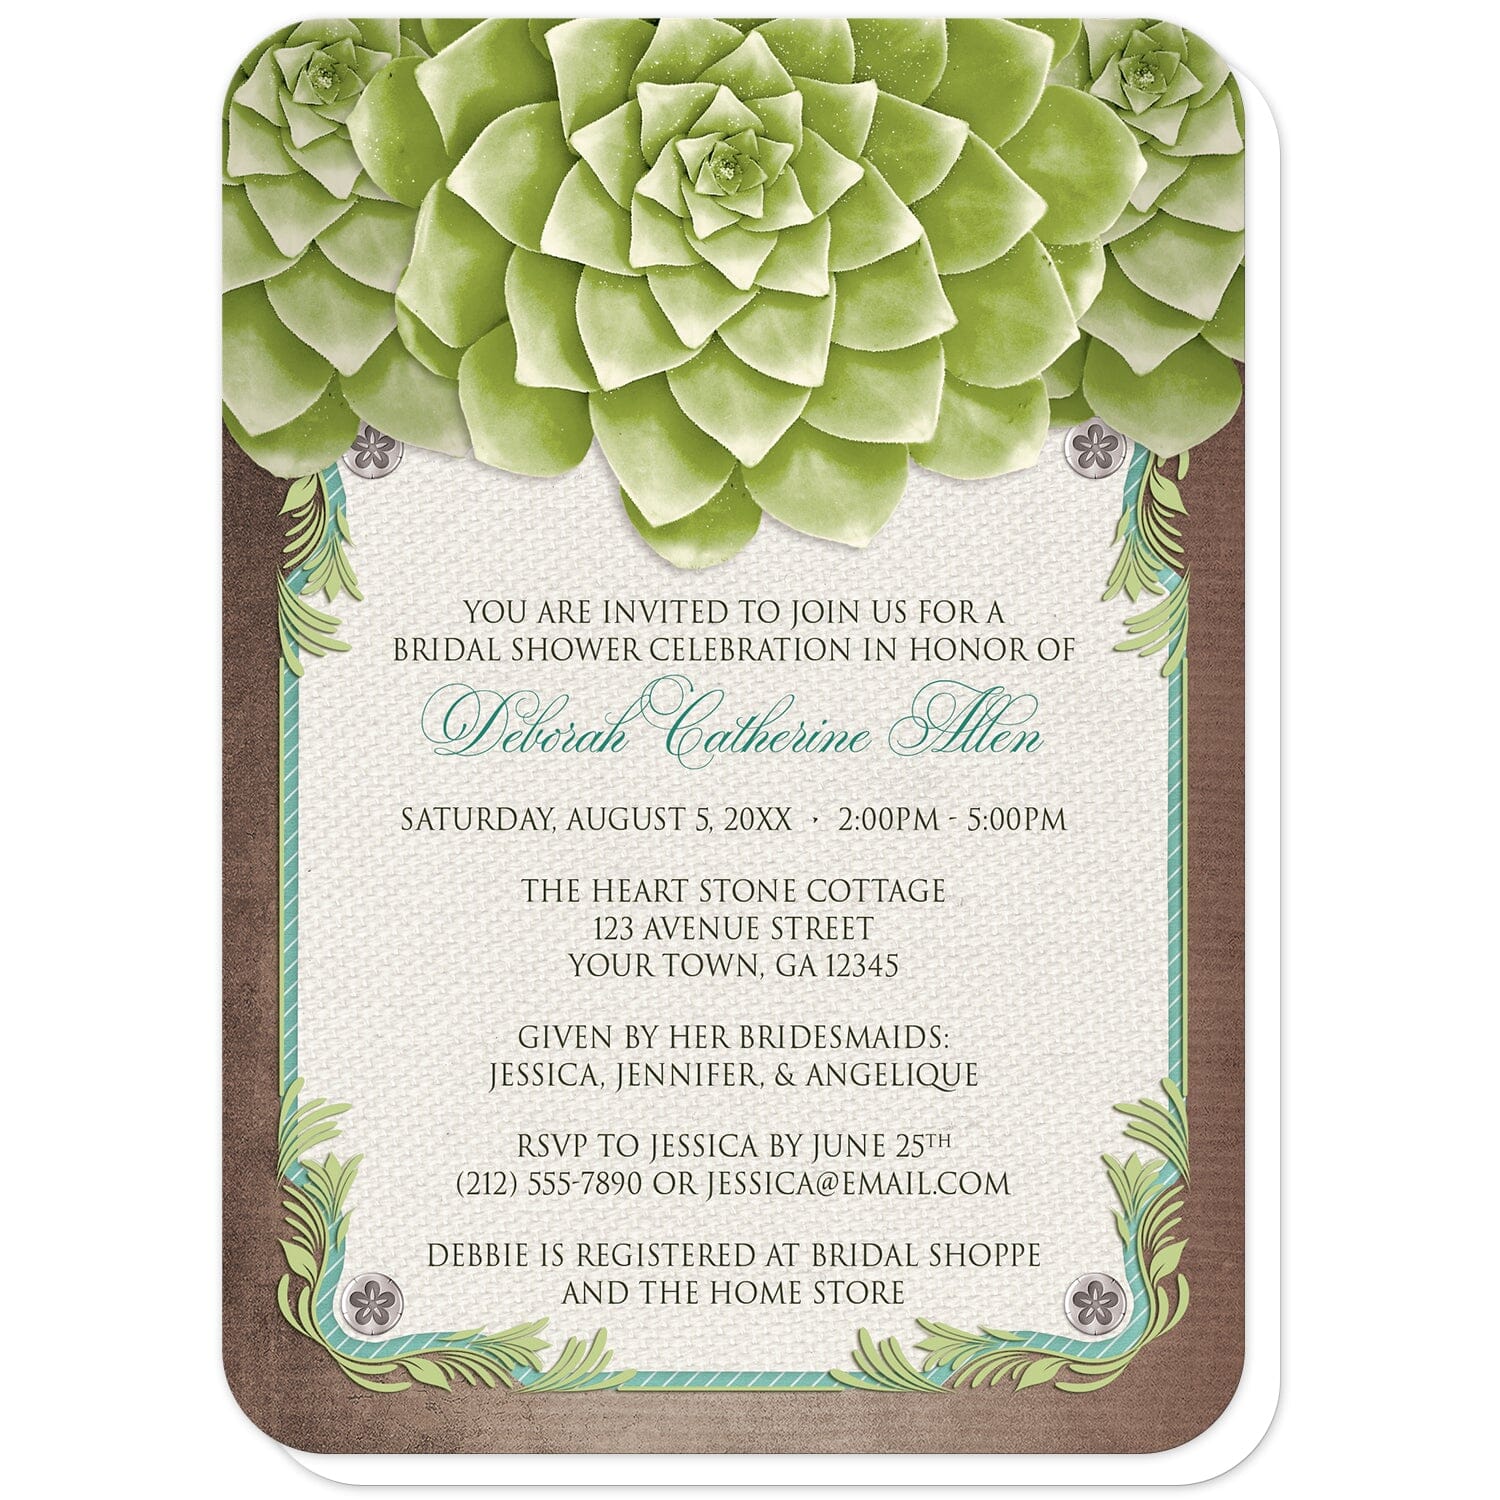 Rustic Succulent Garden Bridal Shower Invitations (with rounded corners) at Artistically Invited. Invites with three large and lovely green succulents along the top over a beige canvas texture illustration framed with a leafy green decorative border, striped teal, and four floral metal pin illustrations, all over a brown background along the edges. Your personalized bridal shower celebration details are custom printed in brown and teal over the beige canvas background in the center area.